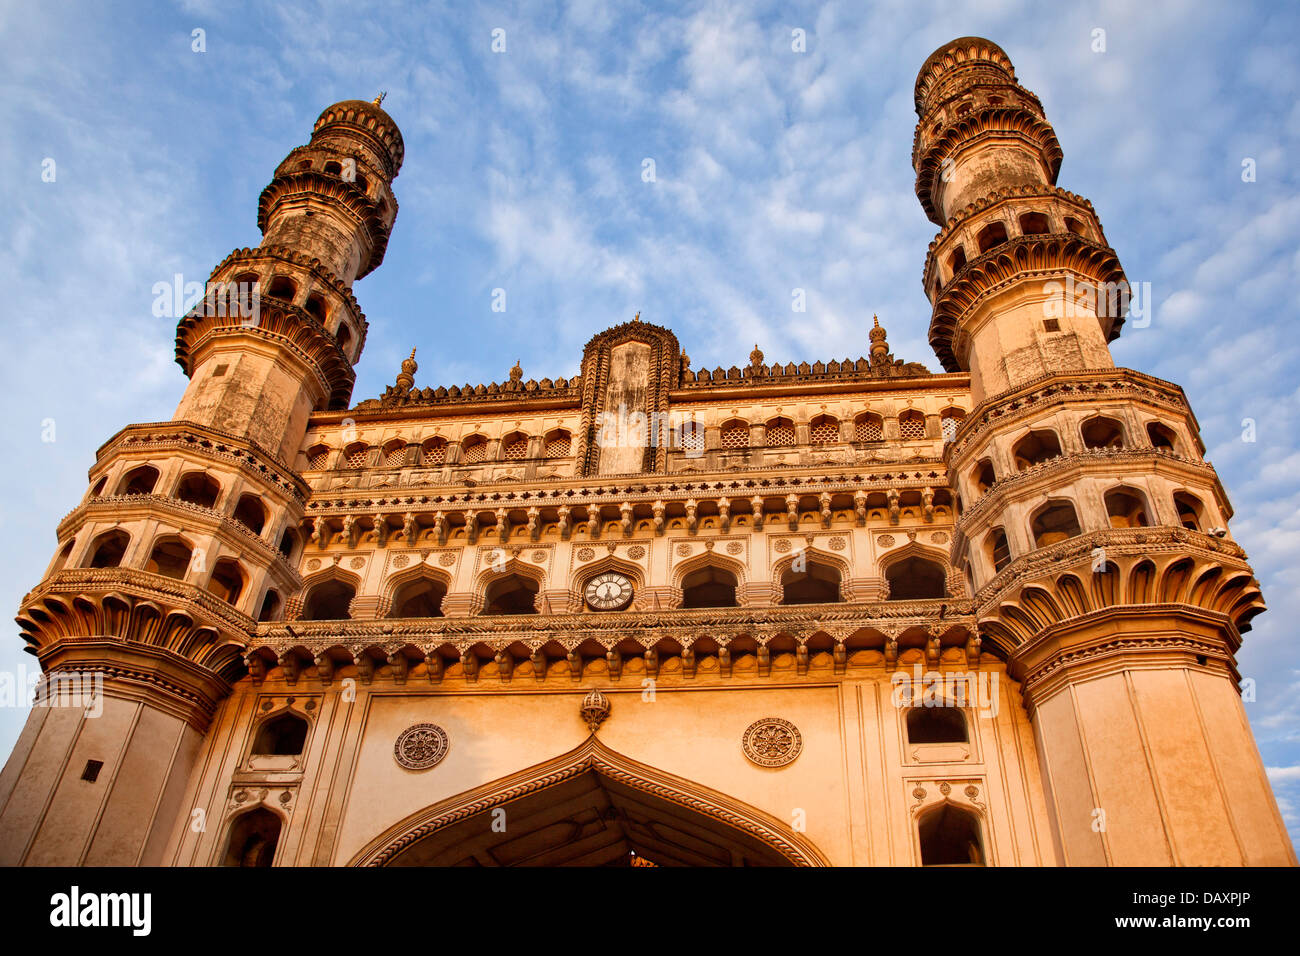 Low angle view of a Mosque, Charminar, Hyderabad, Andhra Pradesh, Inde Banque D'Images